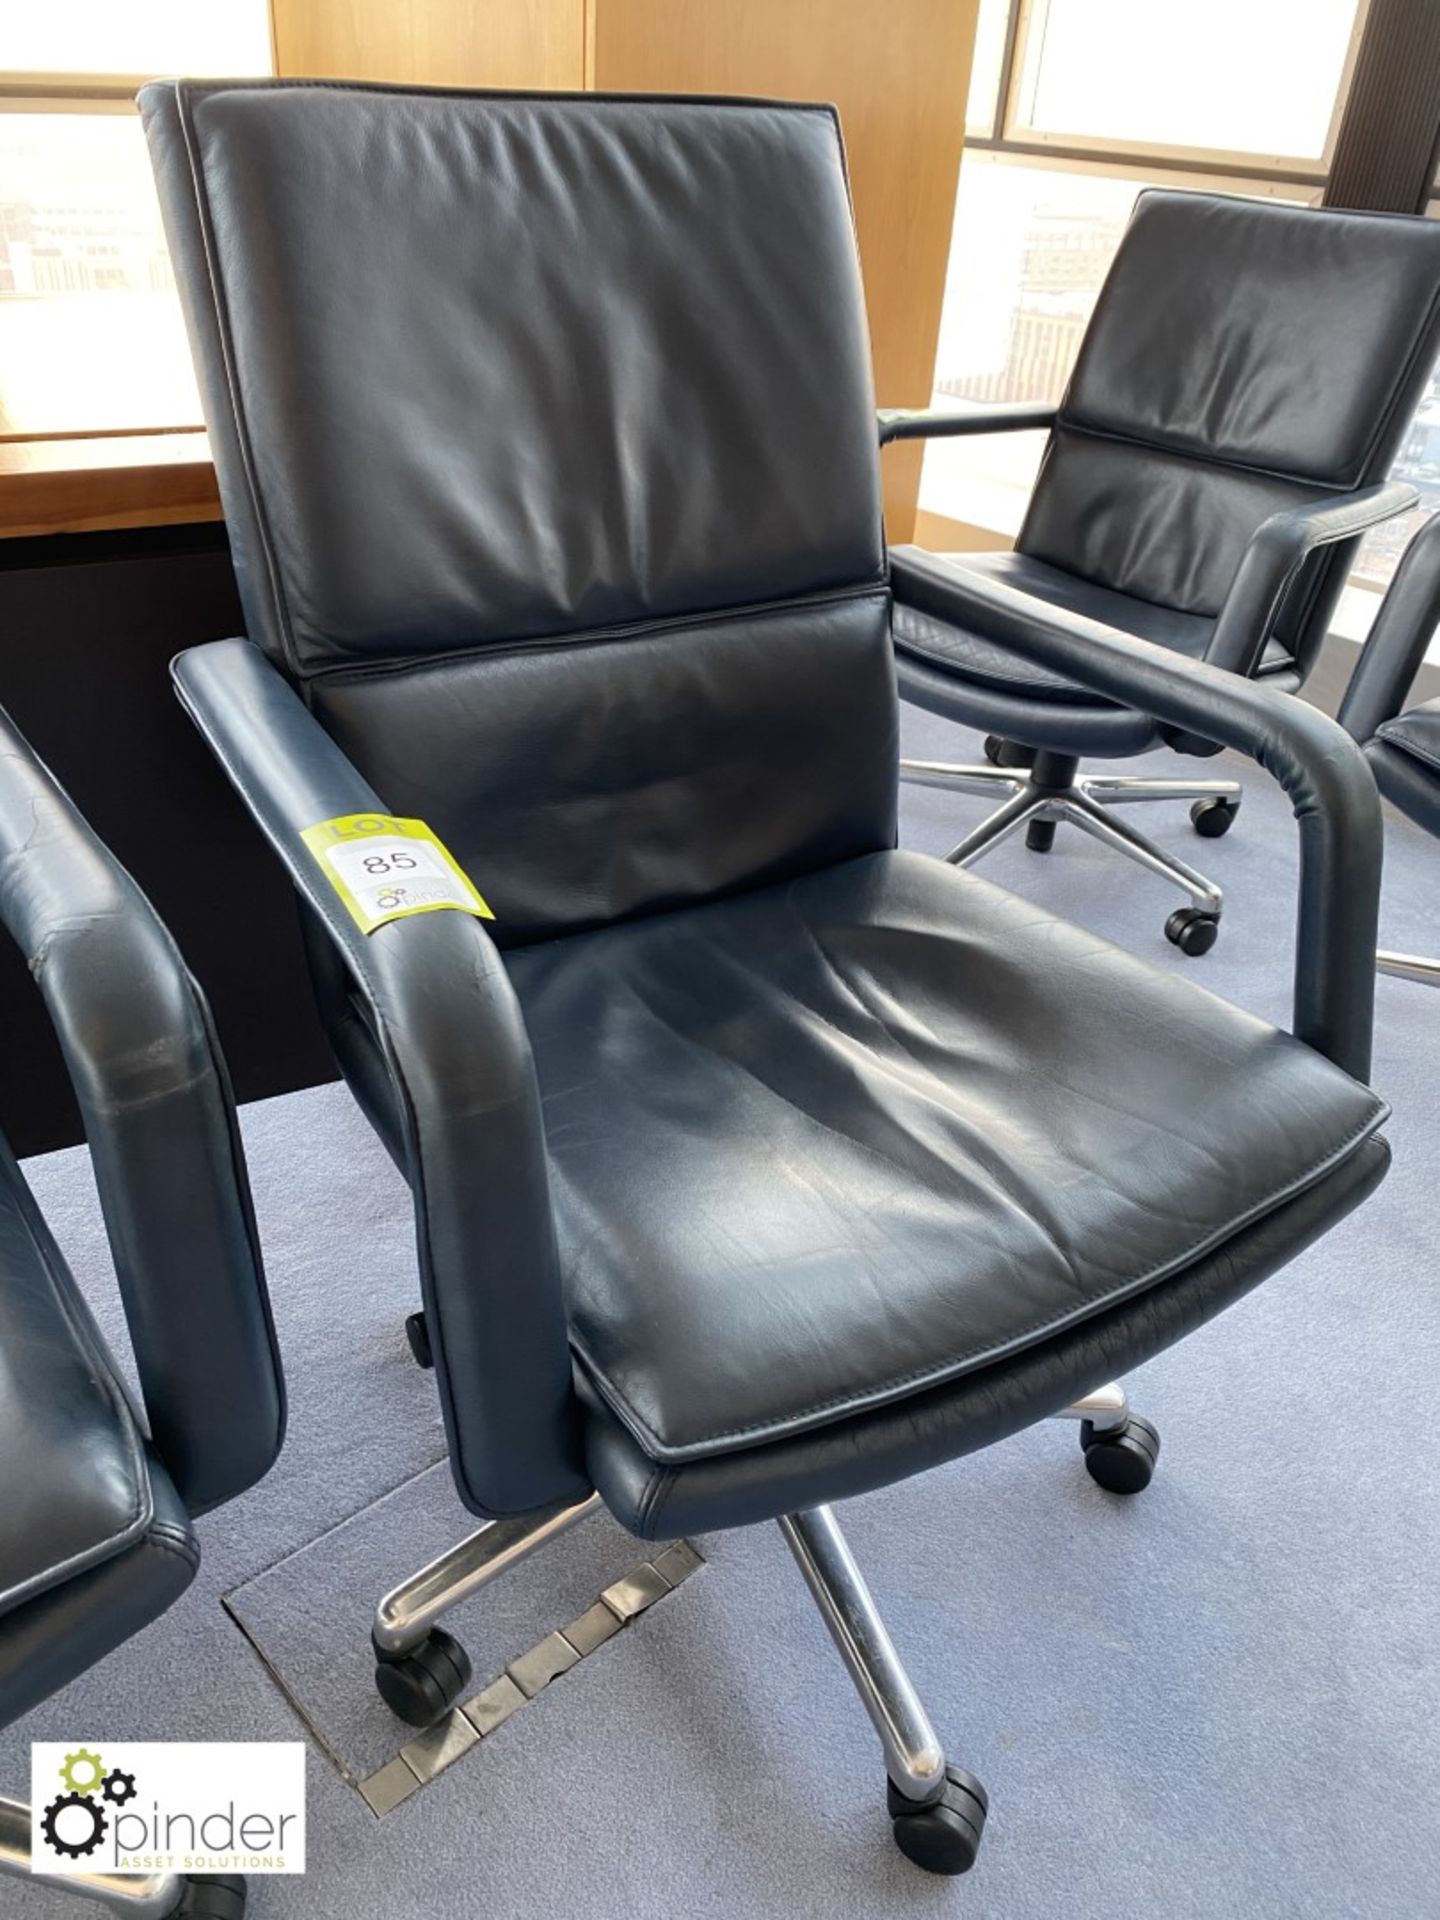 Kellhauer leather upholstered swivel office Armchair (located in Boardroom on 24th Floor)